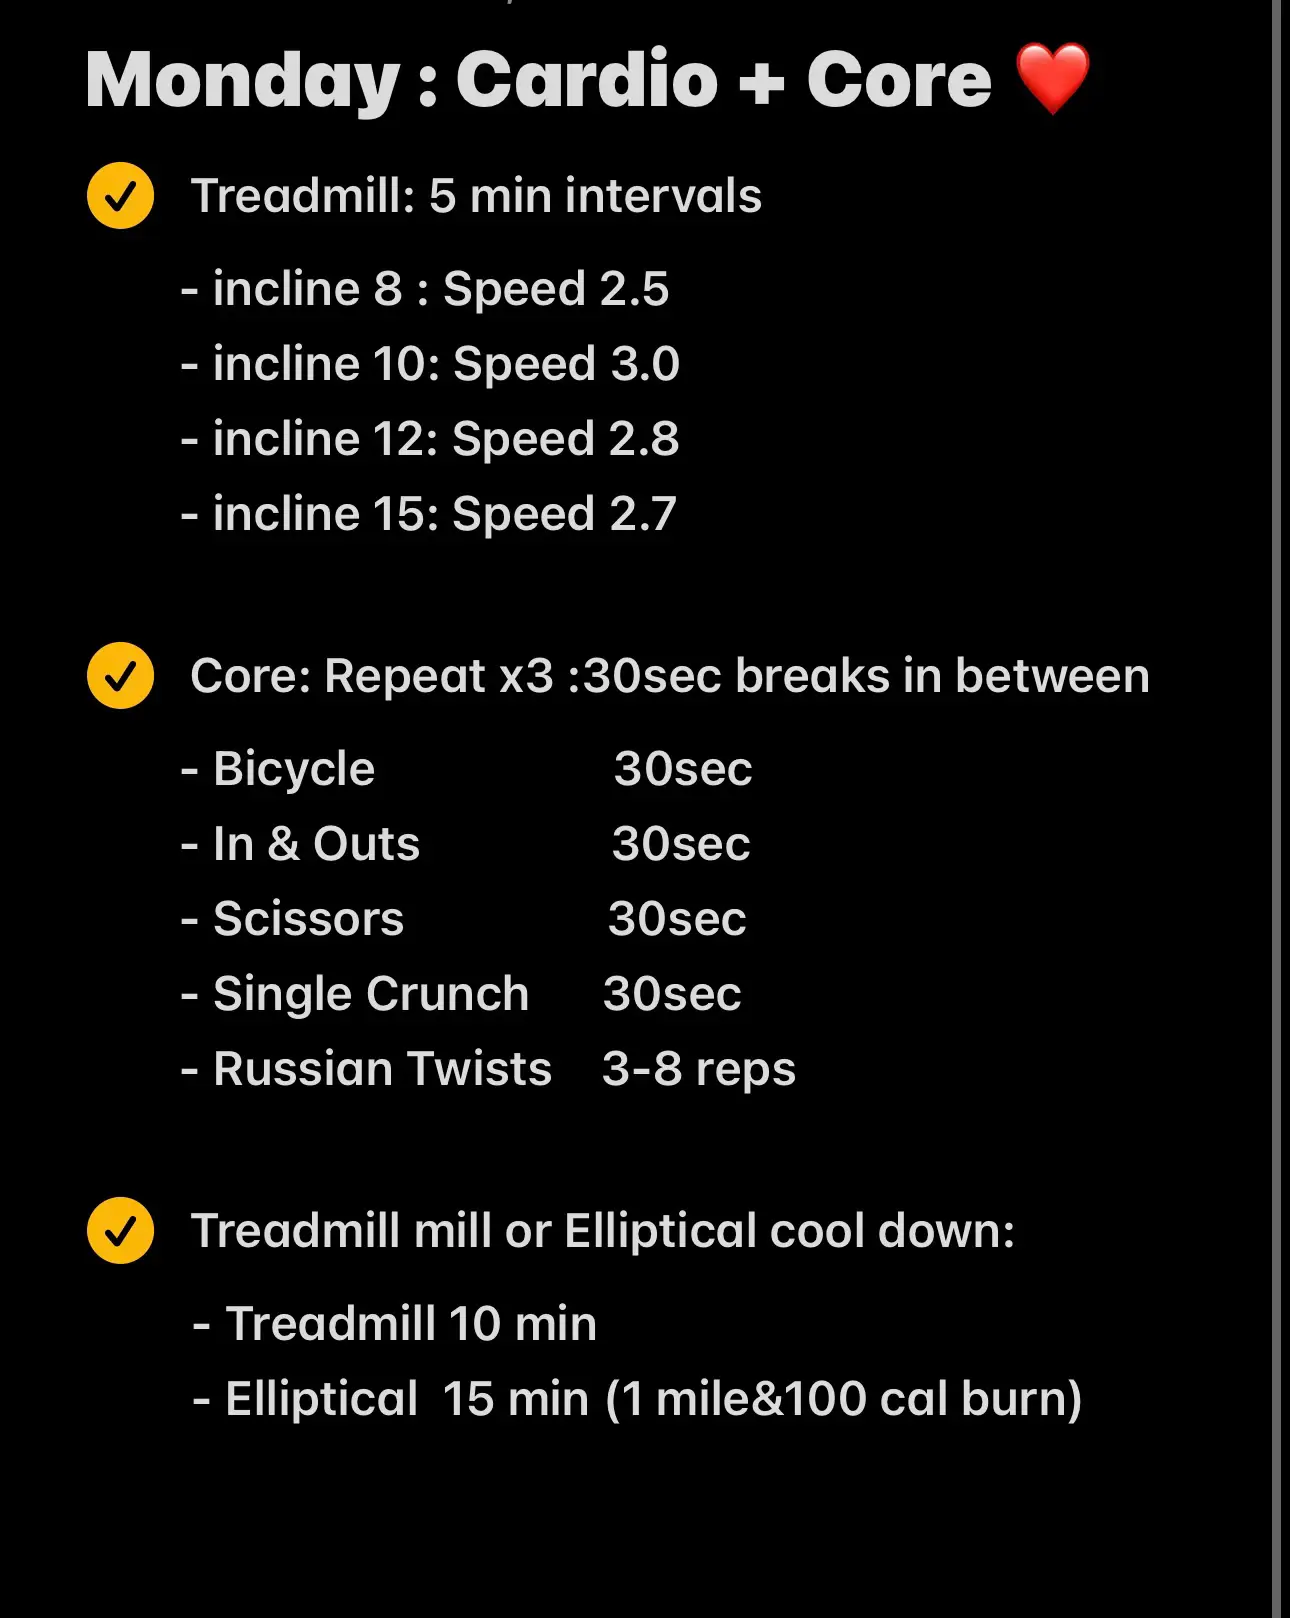 15 Minute High Intensity Cardio Workout (With Modifications) 